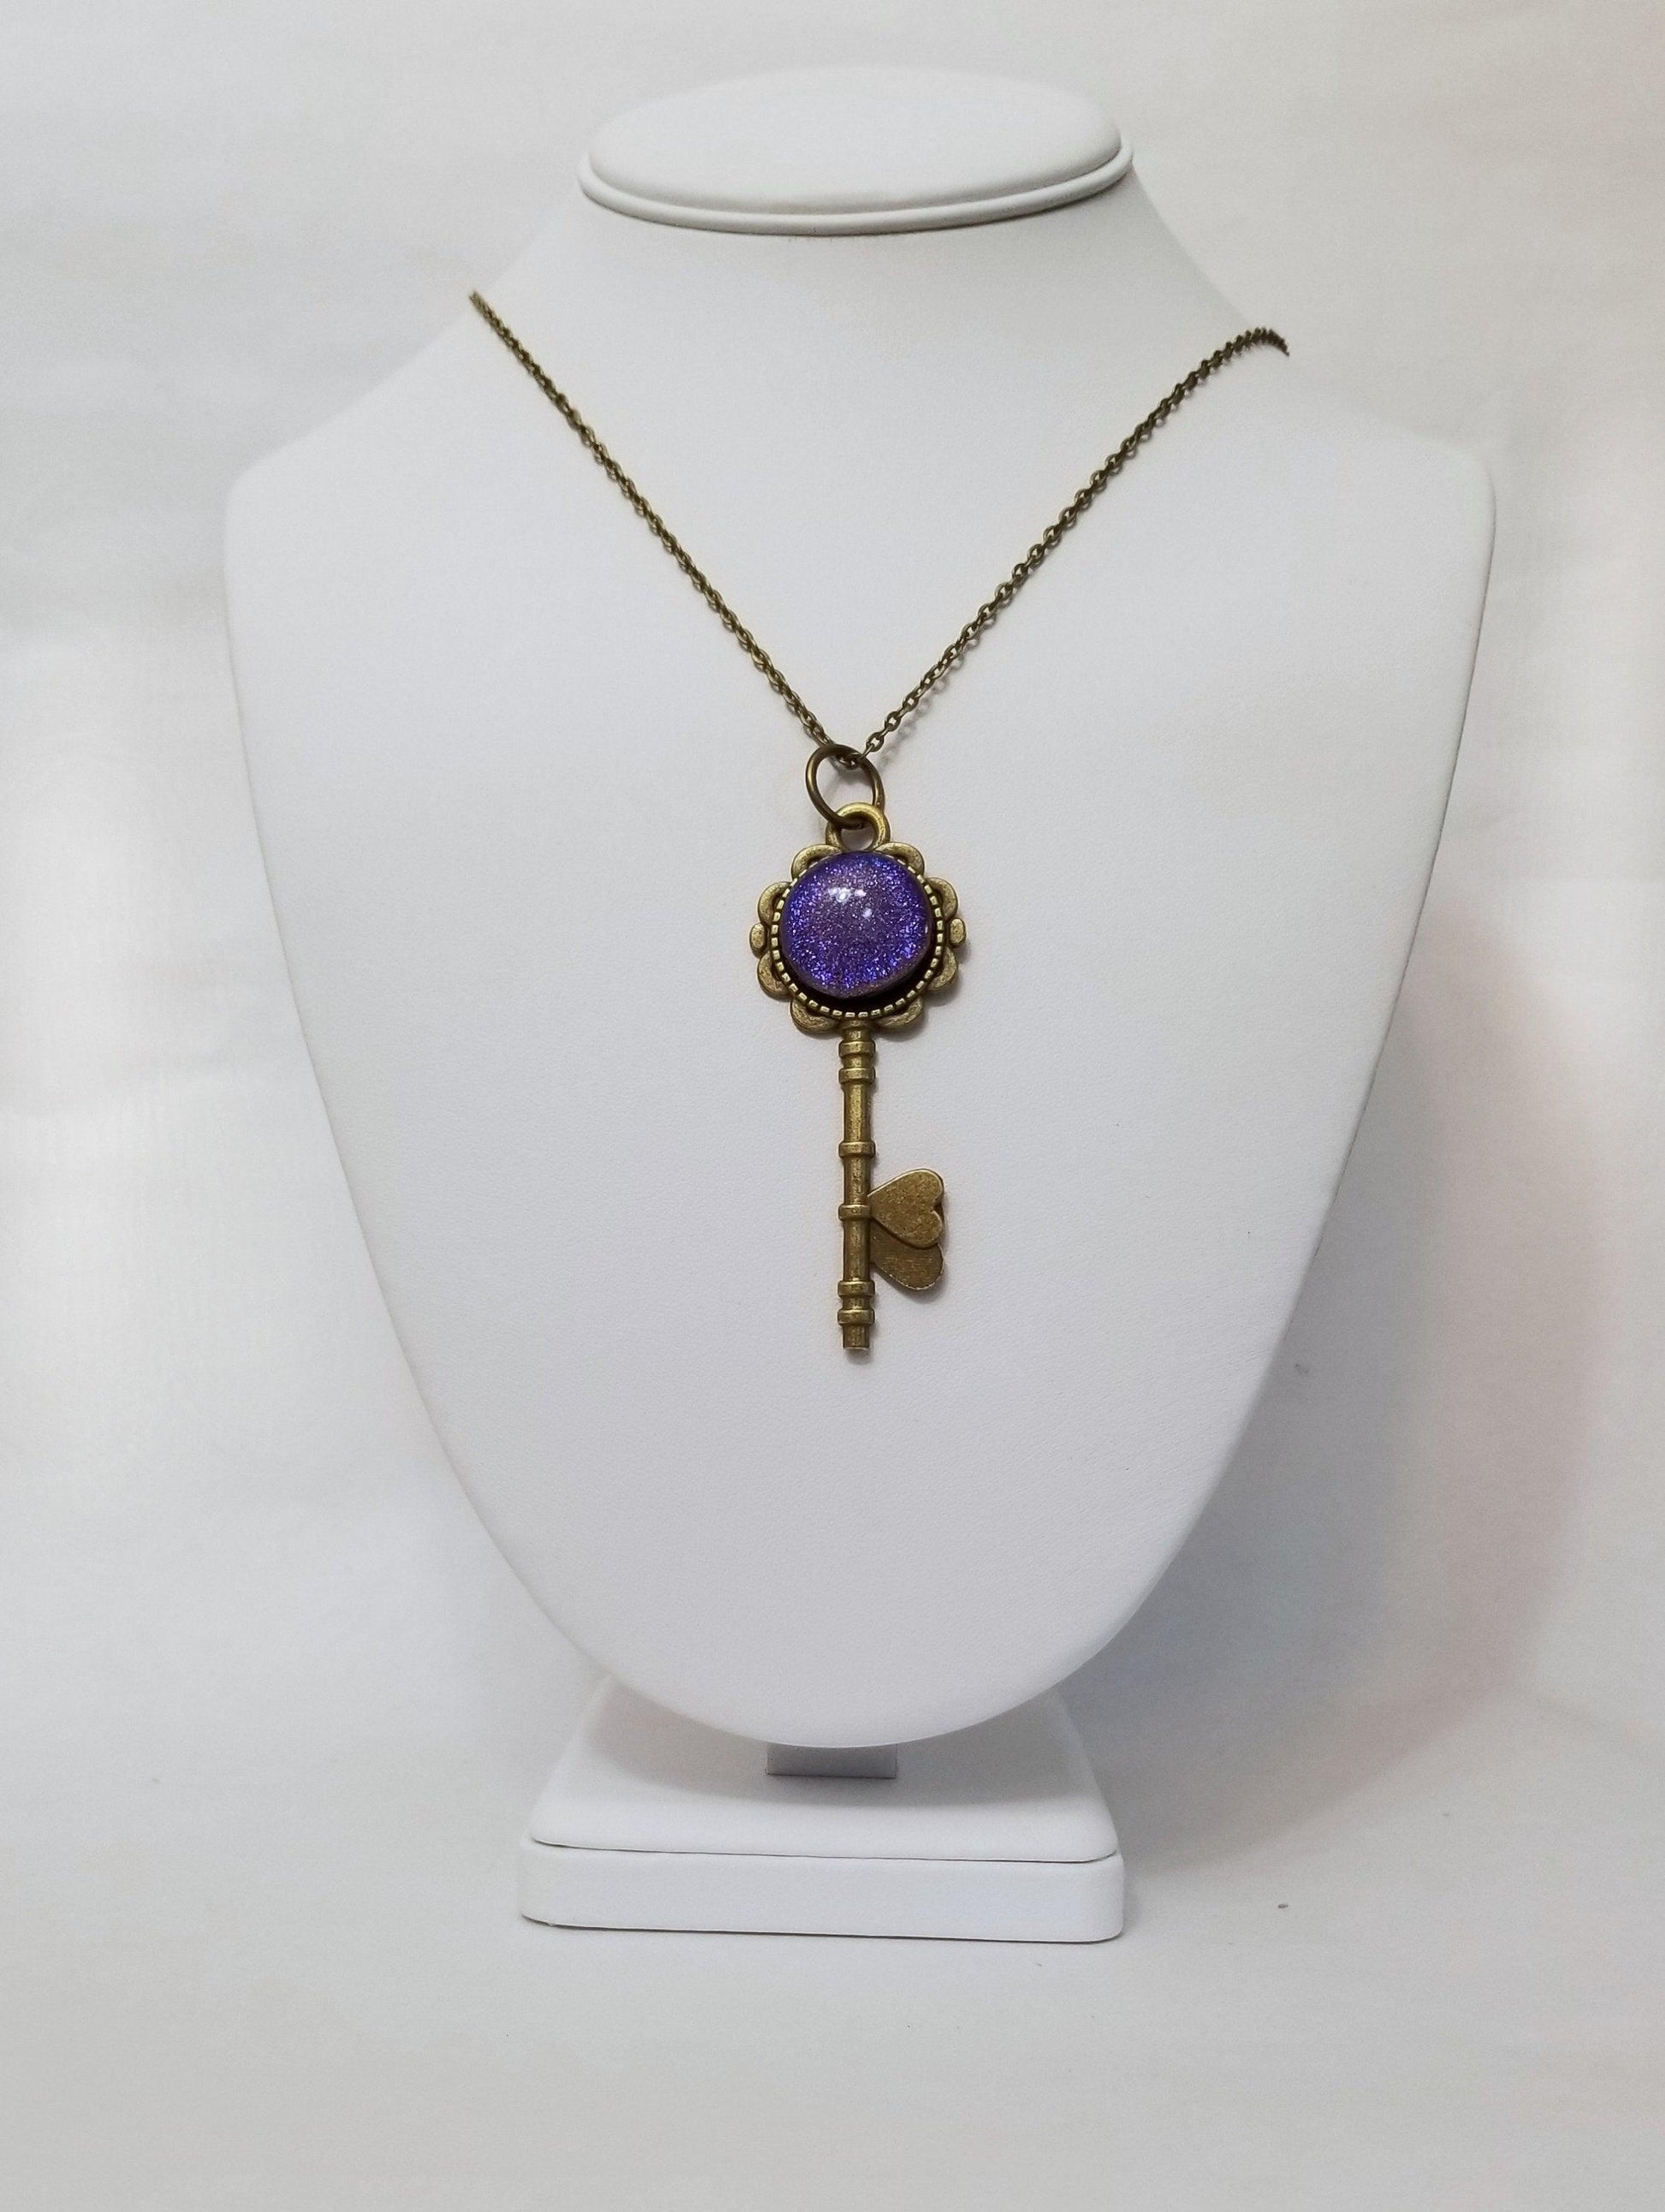 Antiqued Brass  Flowered Skeleton Key with Fused Glass Purple Dichroic cabochon on 24 inch brass plated chain